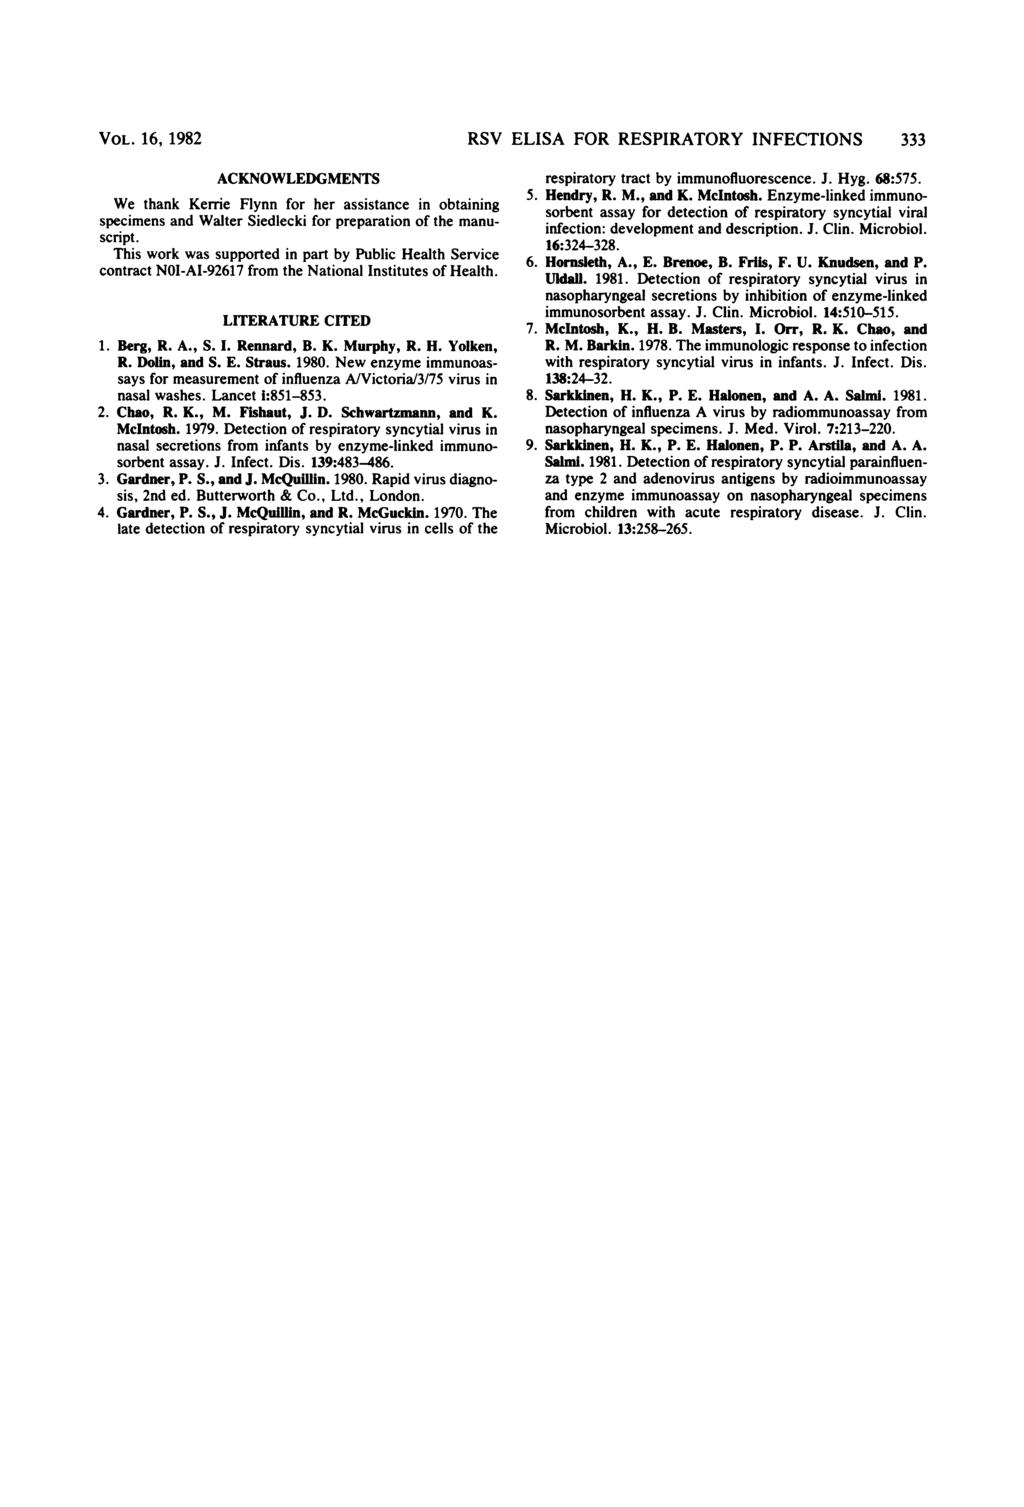 VOL. 16, 1982 RSV ELISA FOR RESPIRATORY INFECTIONS 333 ACKNOWLEDGMENTS We thank Kerrie Flynn for her assistance in obtaining specimens and Walter Siedlecki for preparation of the manuscript.